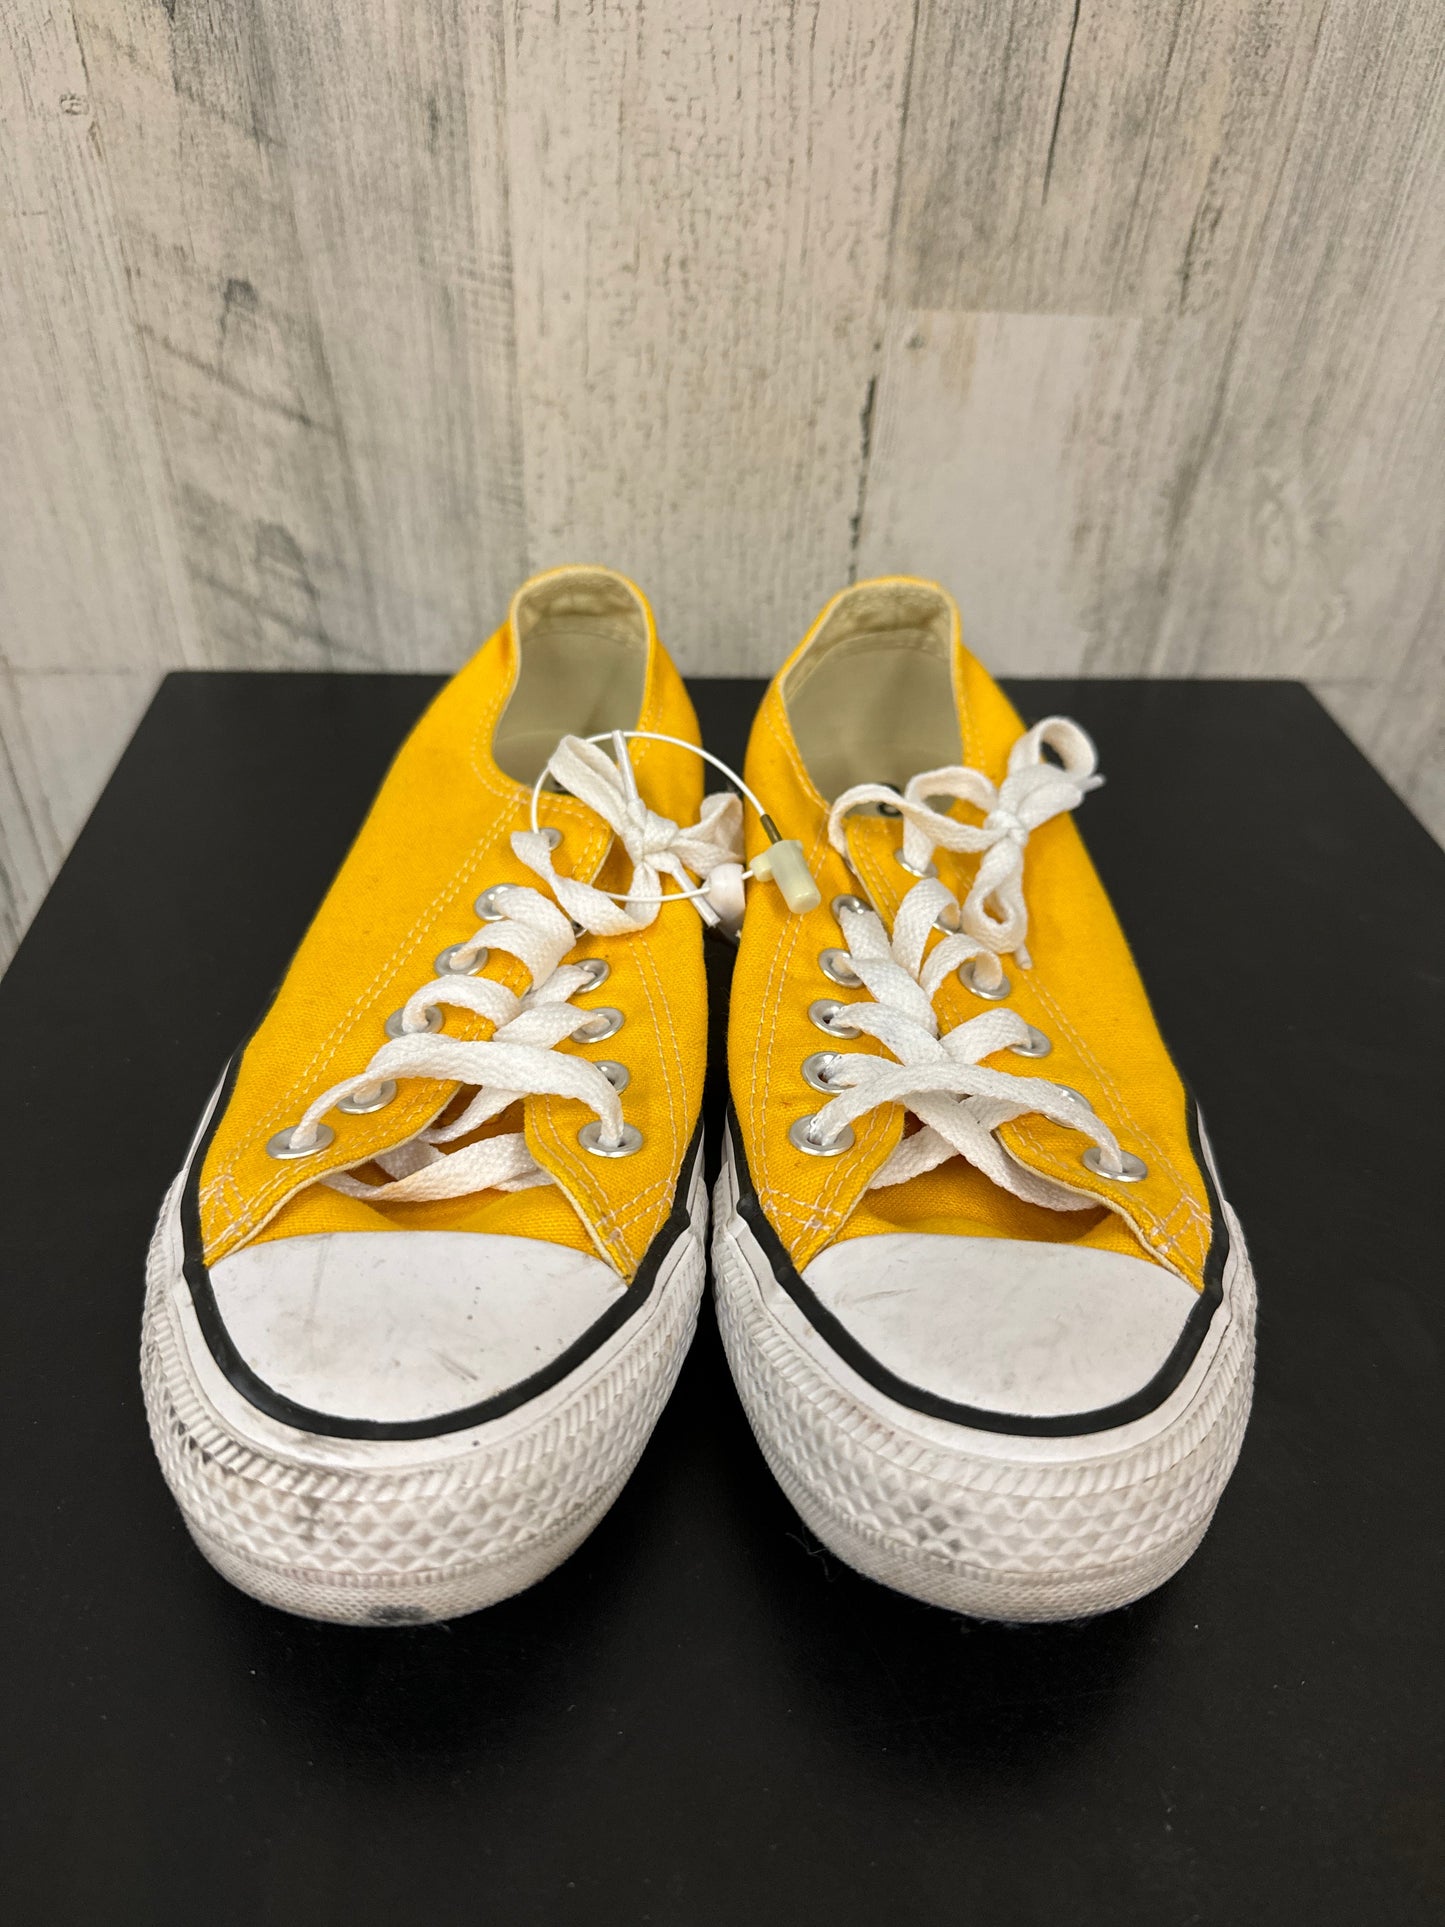 Yellow Shoes Sneakers Converse, Size 7.5